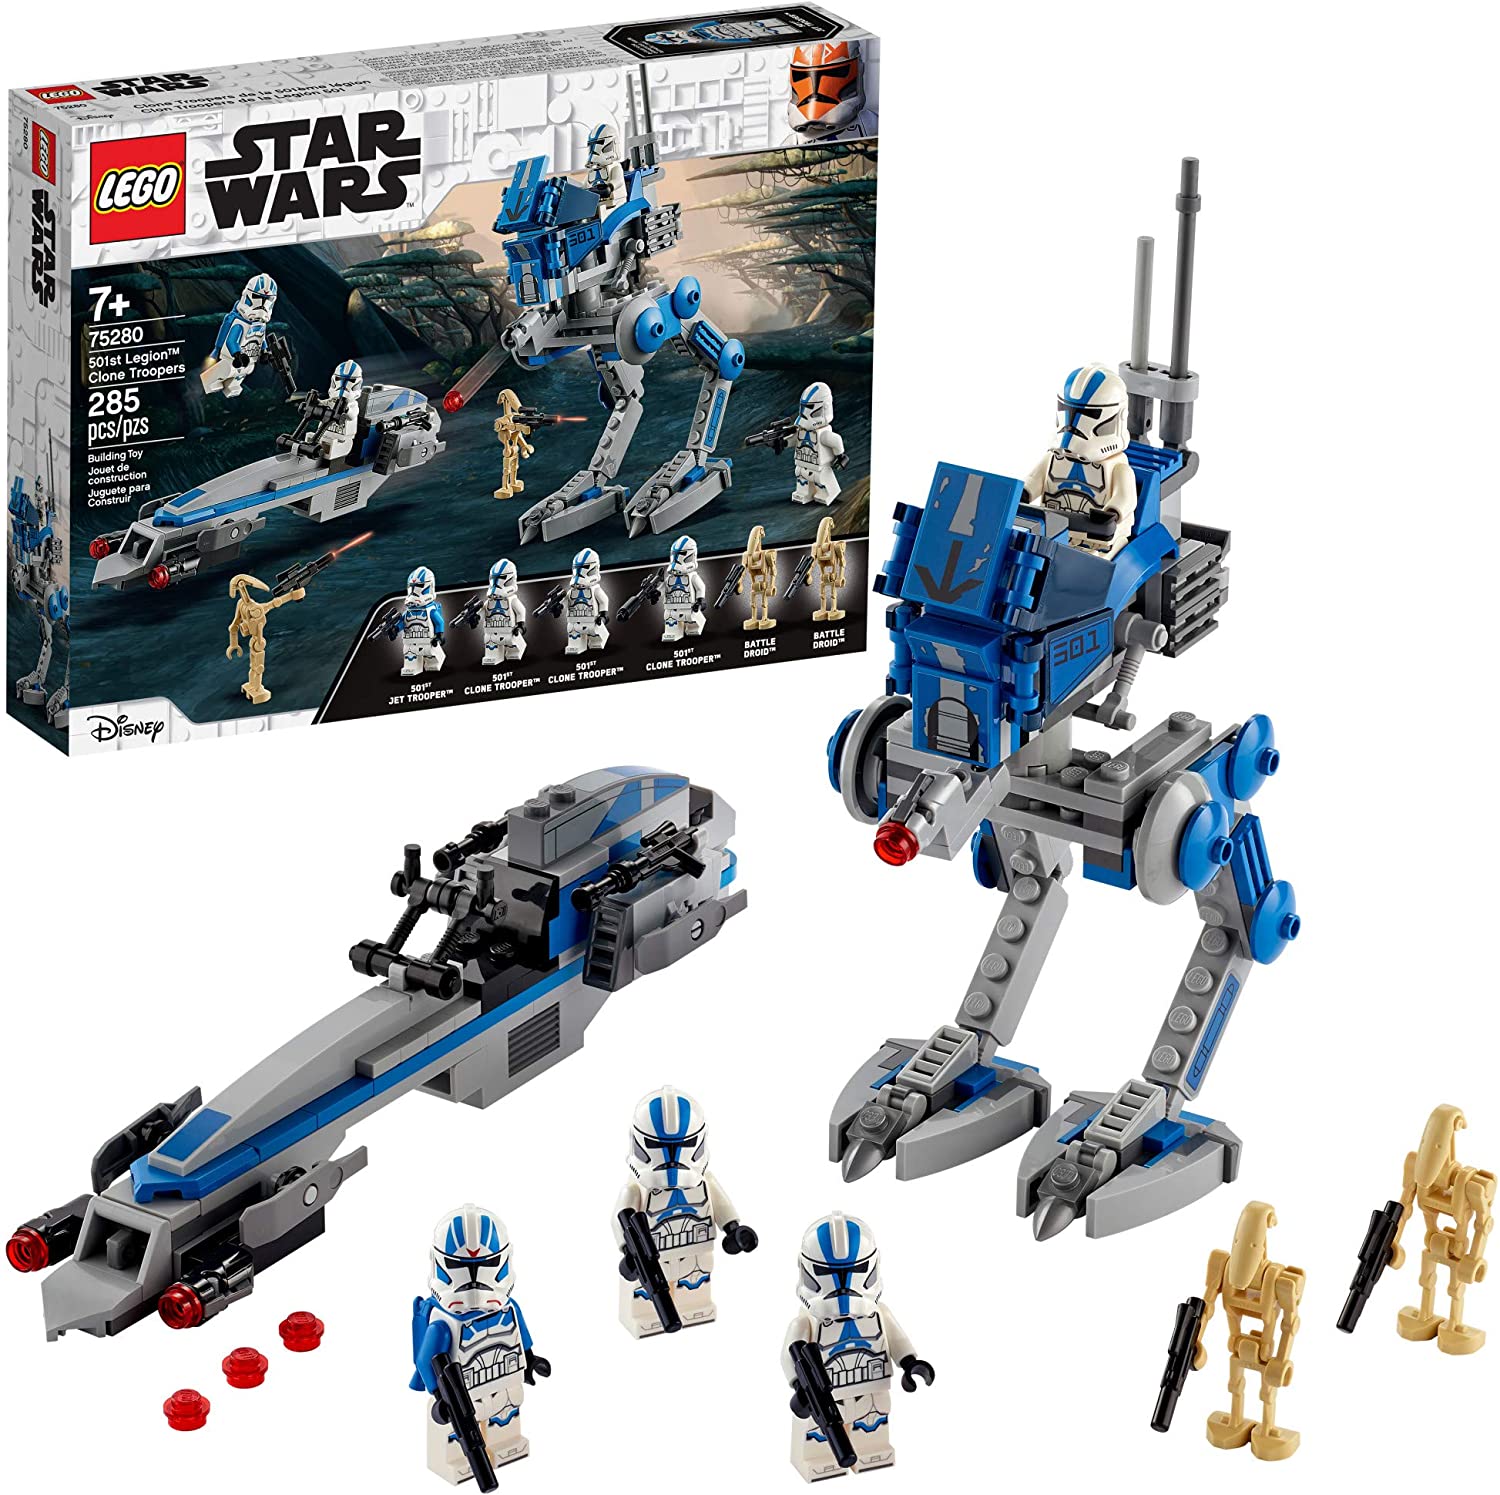 New Clone Wars 501st Legion Clone Troopers Lego Set available now